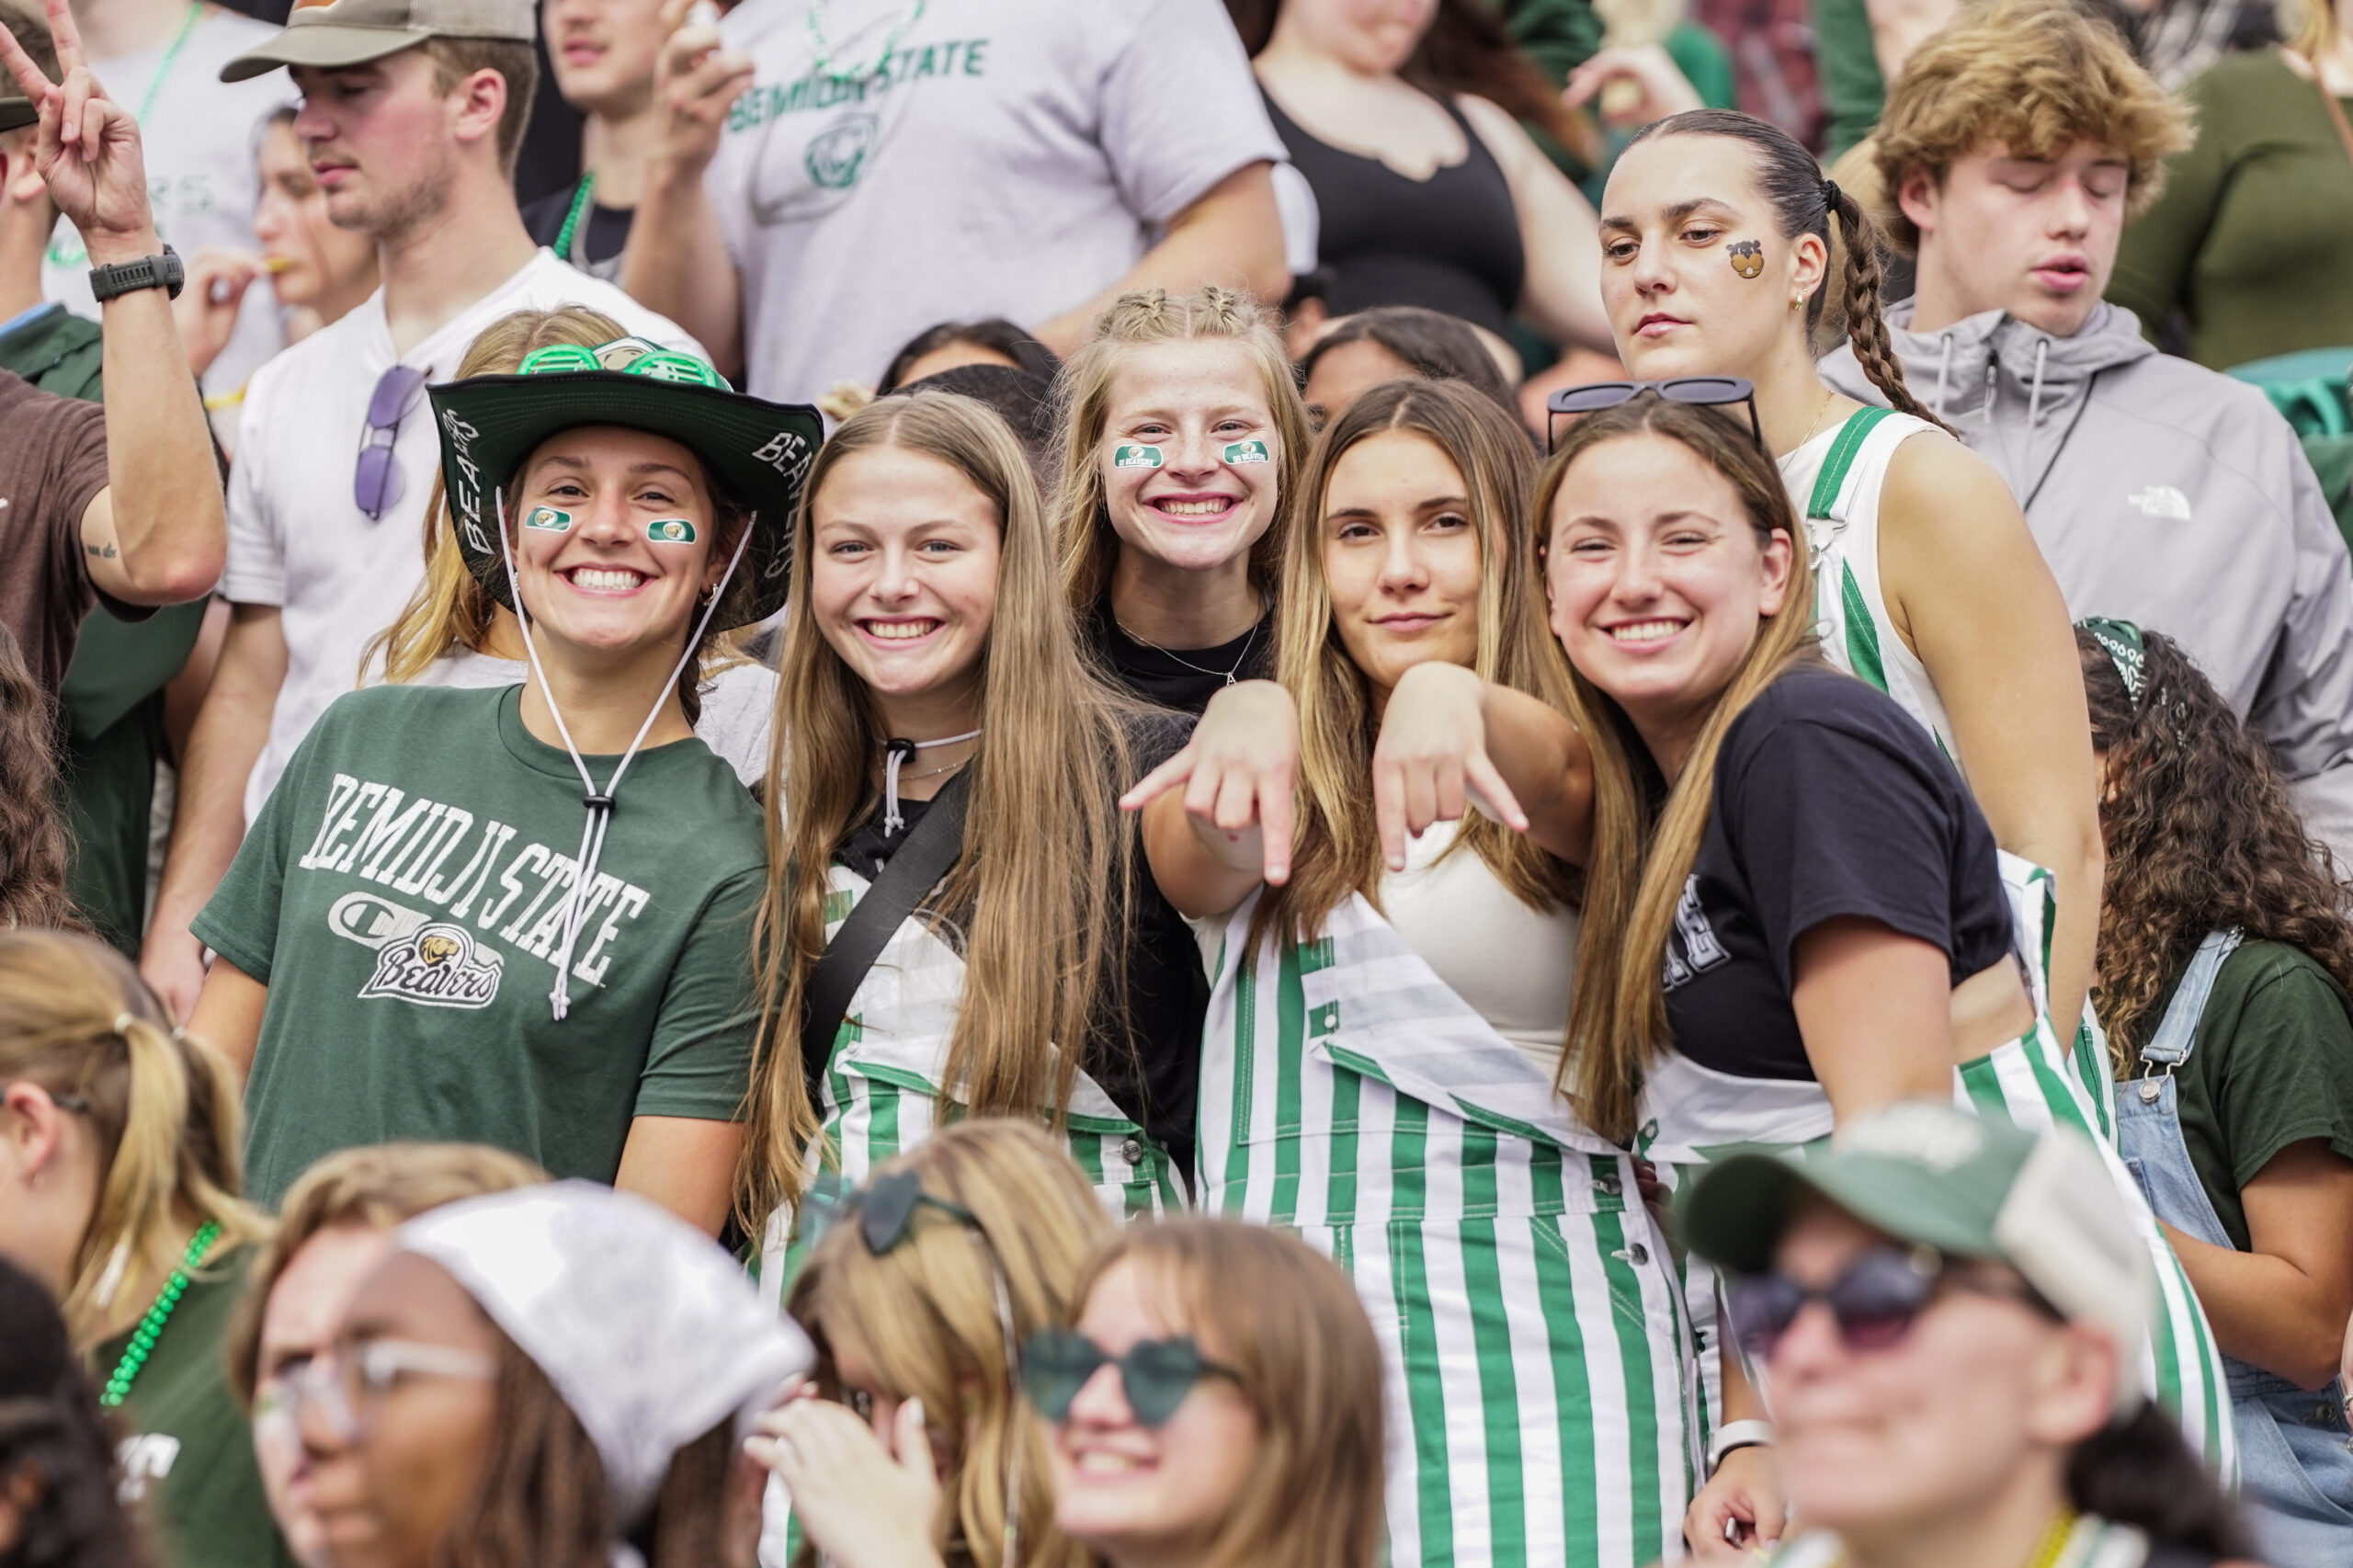 Members of the Bemidji State women's basketball team take part in the action at the Homecoming football game on Saturday, Sept. 30, 2023, at Chet Anderson Stadium. (Micah Friez / Bemidji State)